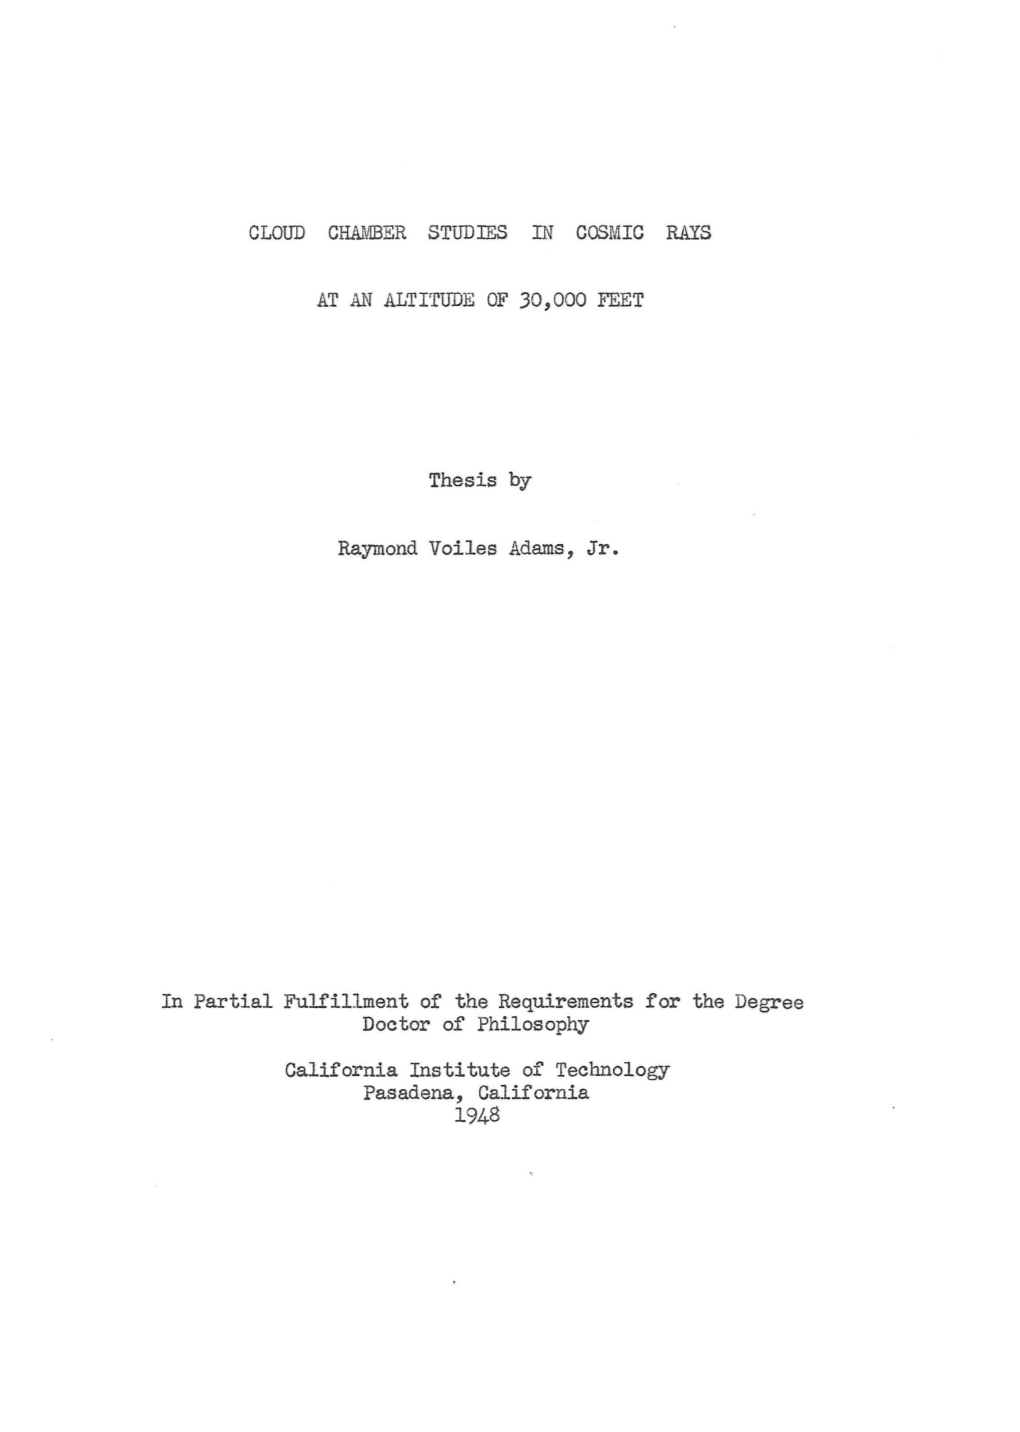 CLOUD CHAMBER STUDIES in COSMIC RAYS at an ALTITUDE of 30,000 FEET Thesis by Raymond Voiles Adams, Jr. in Partial Fulfillment Of